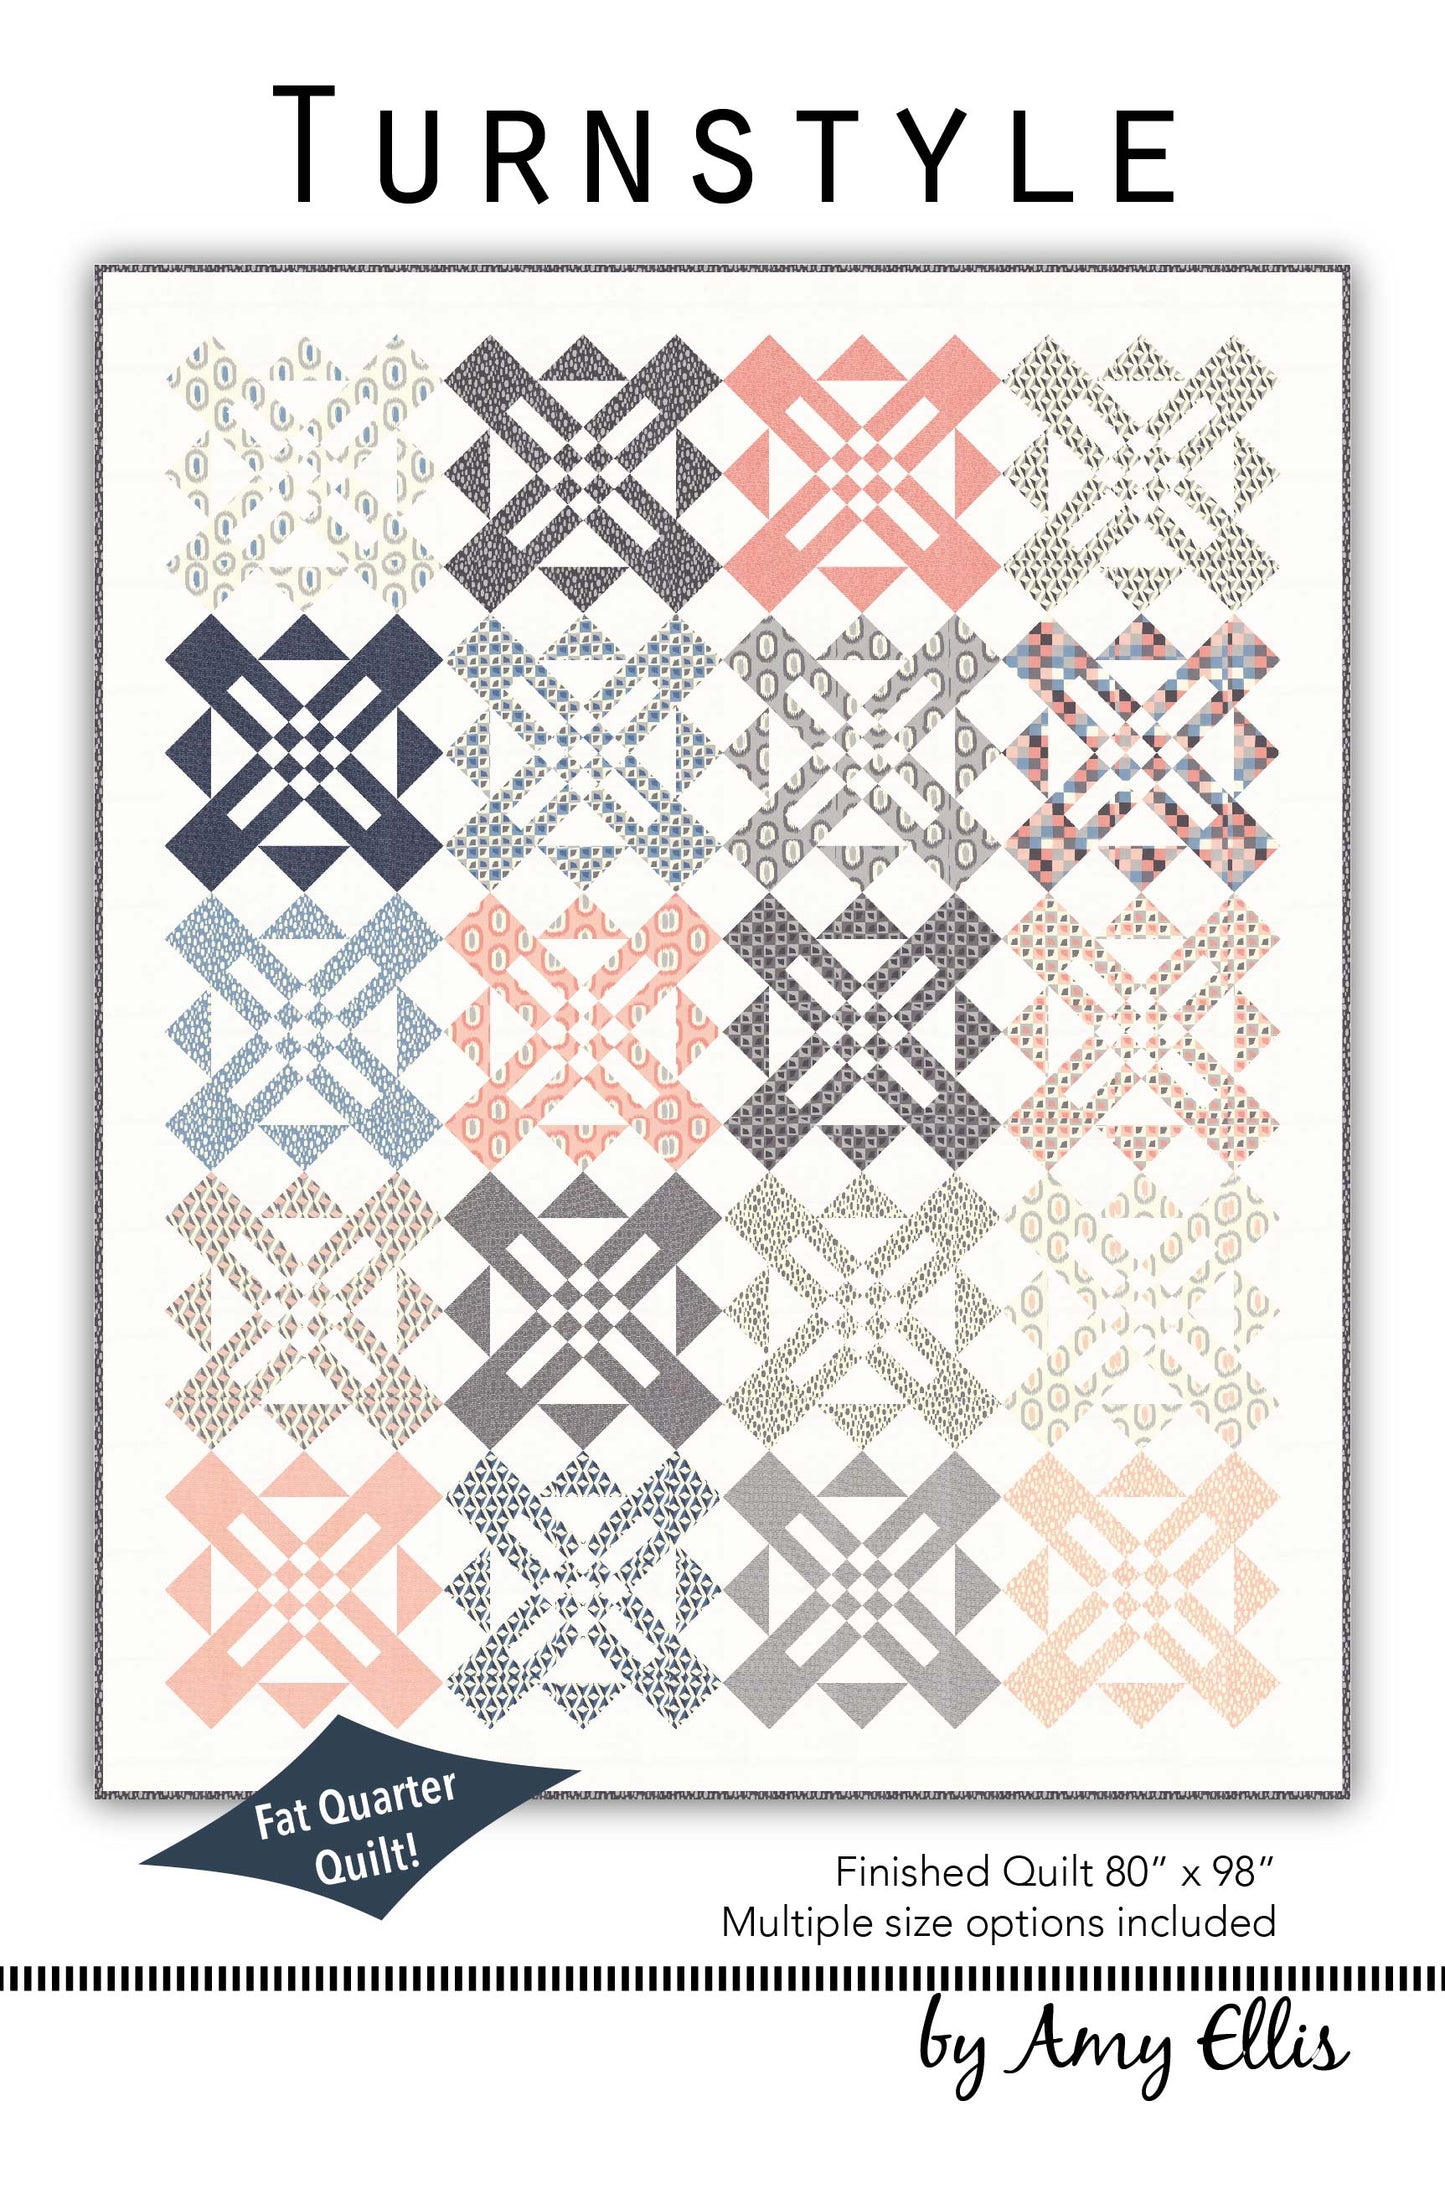 All-Time Bestselling Pattern Bundle - Paper Patterns